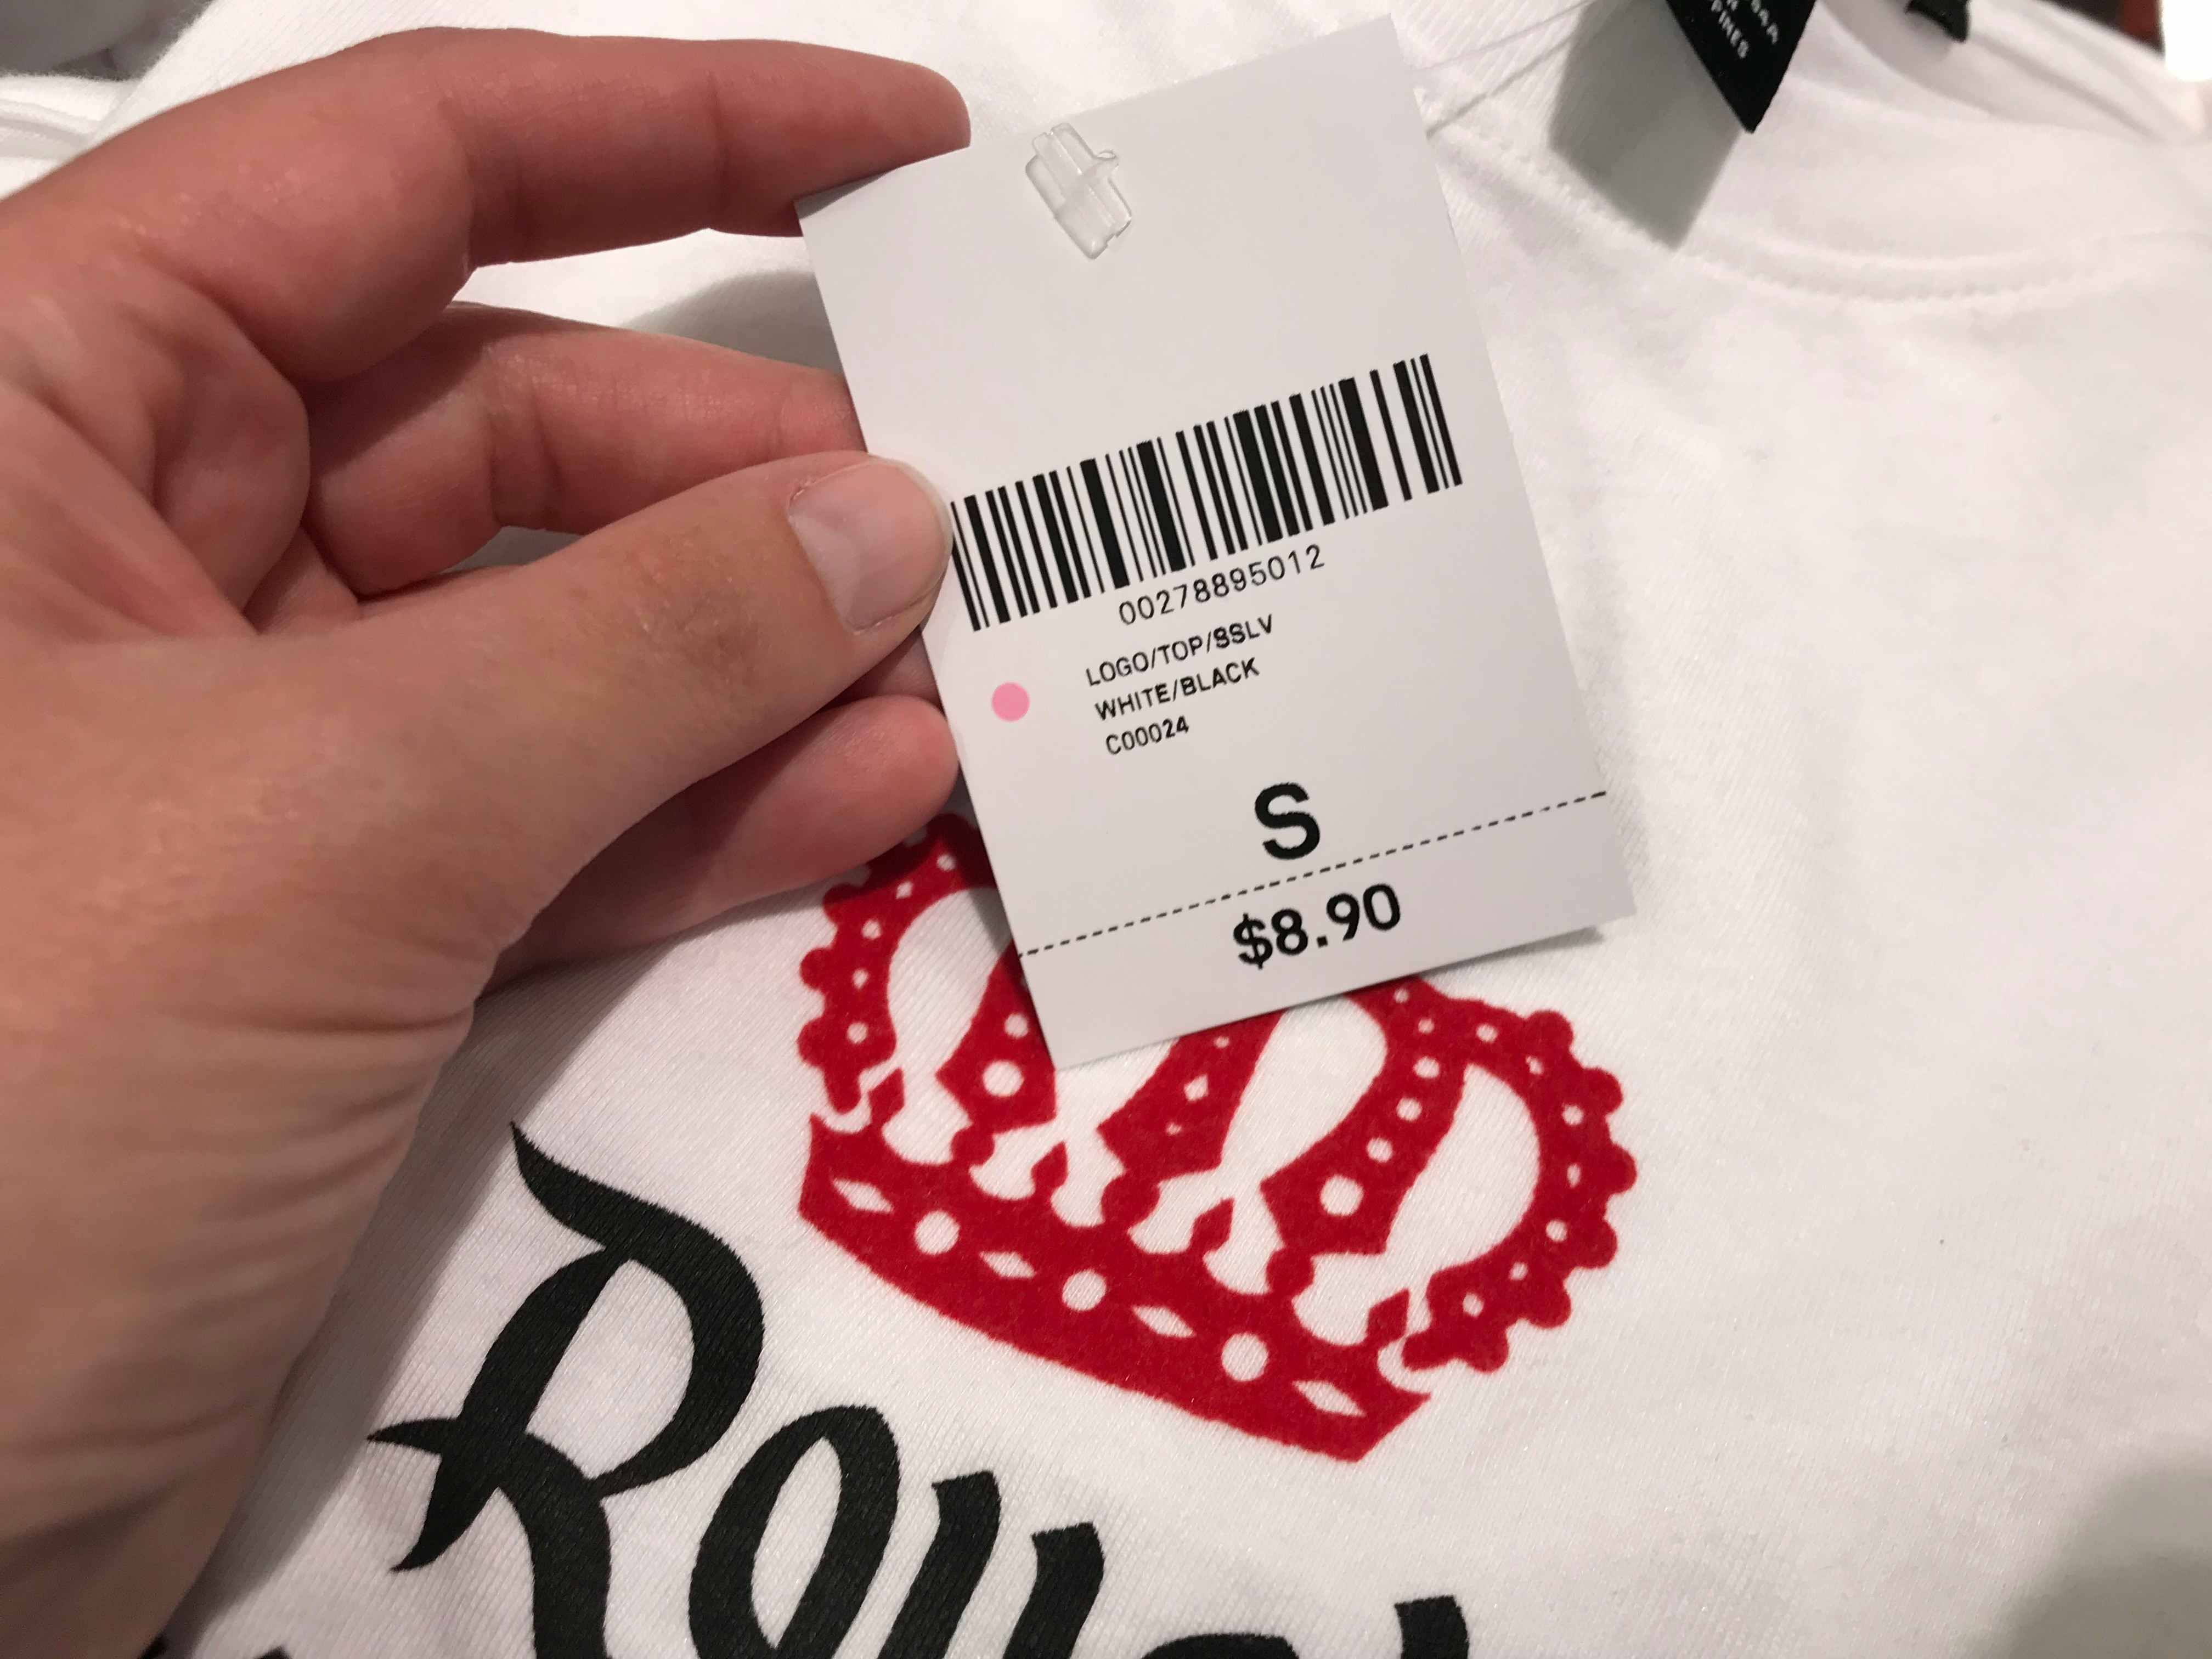 forever 21 - The Daily Dot